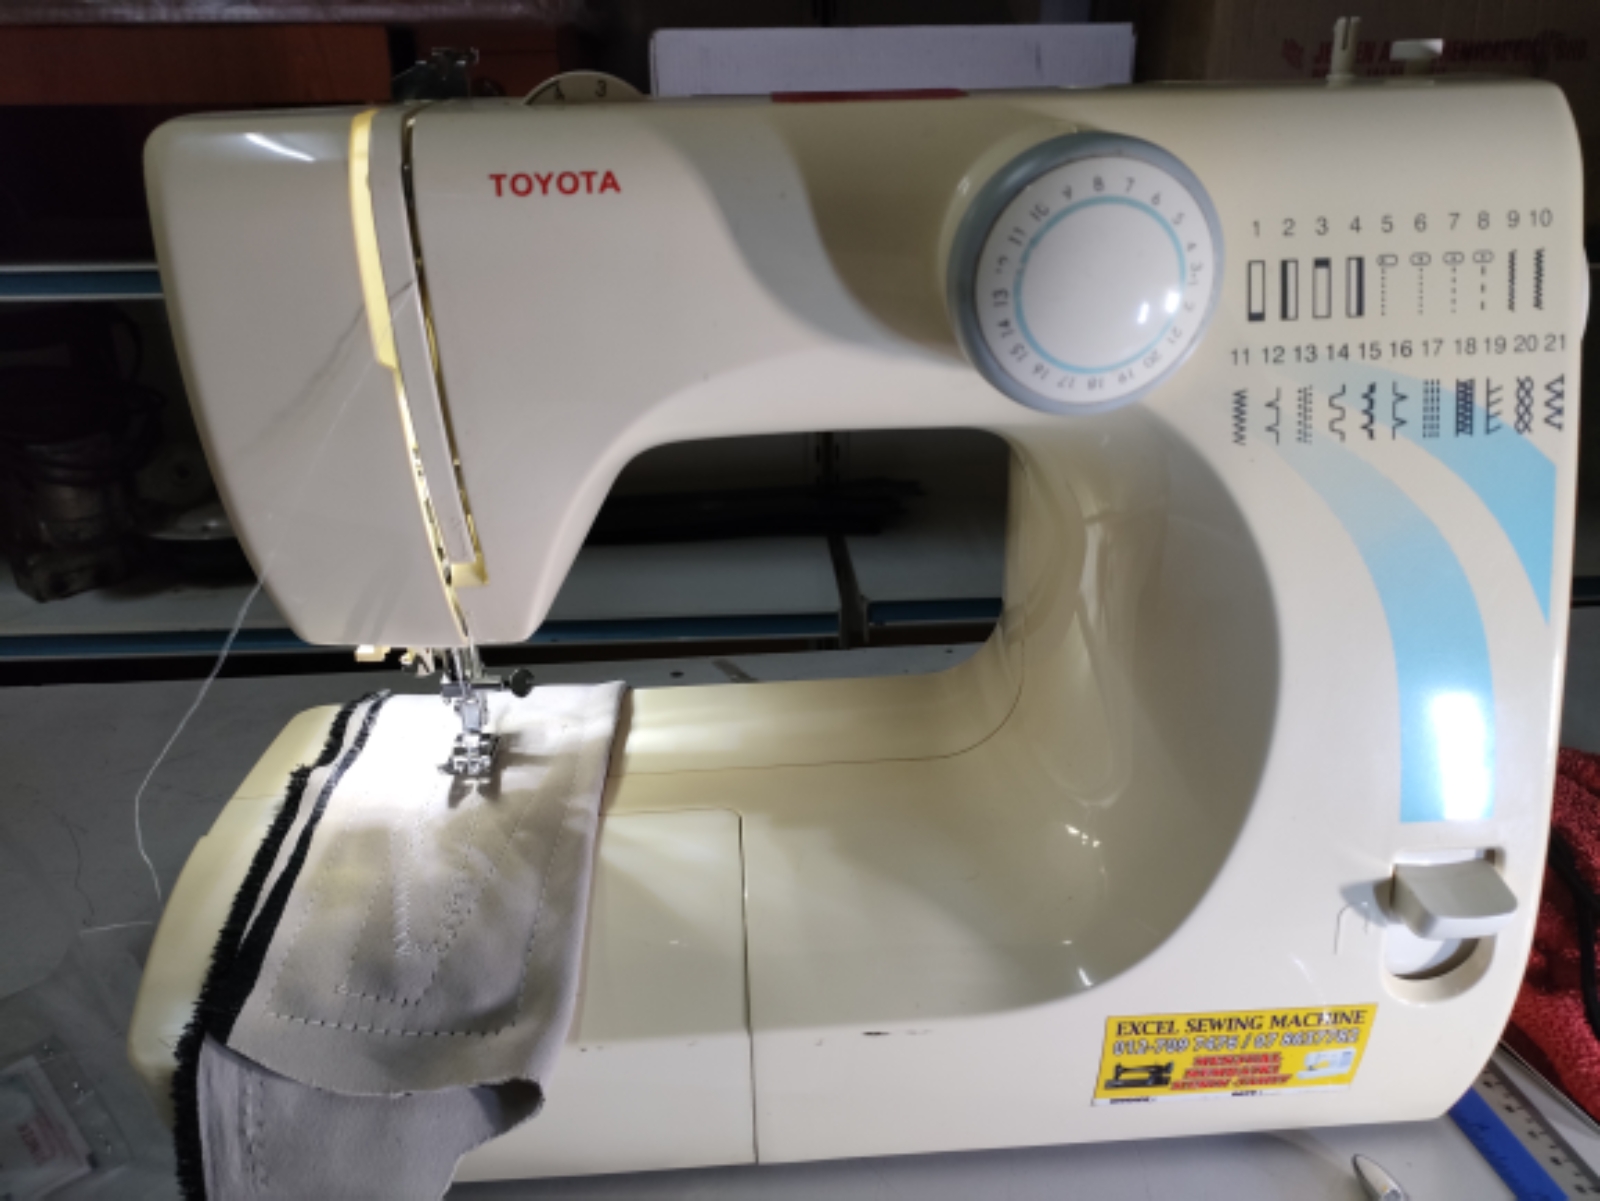  JOB REPAIR SEVIS FOR TOYOTA PORTABLE SEWING MACHINE